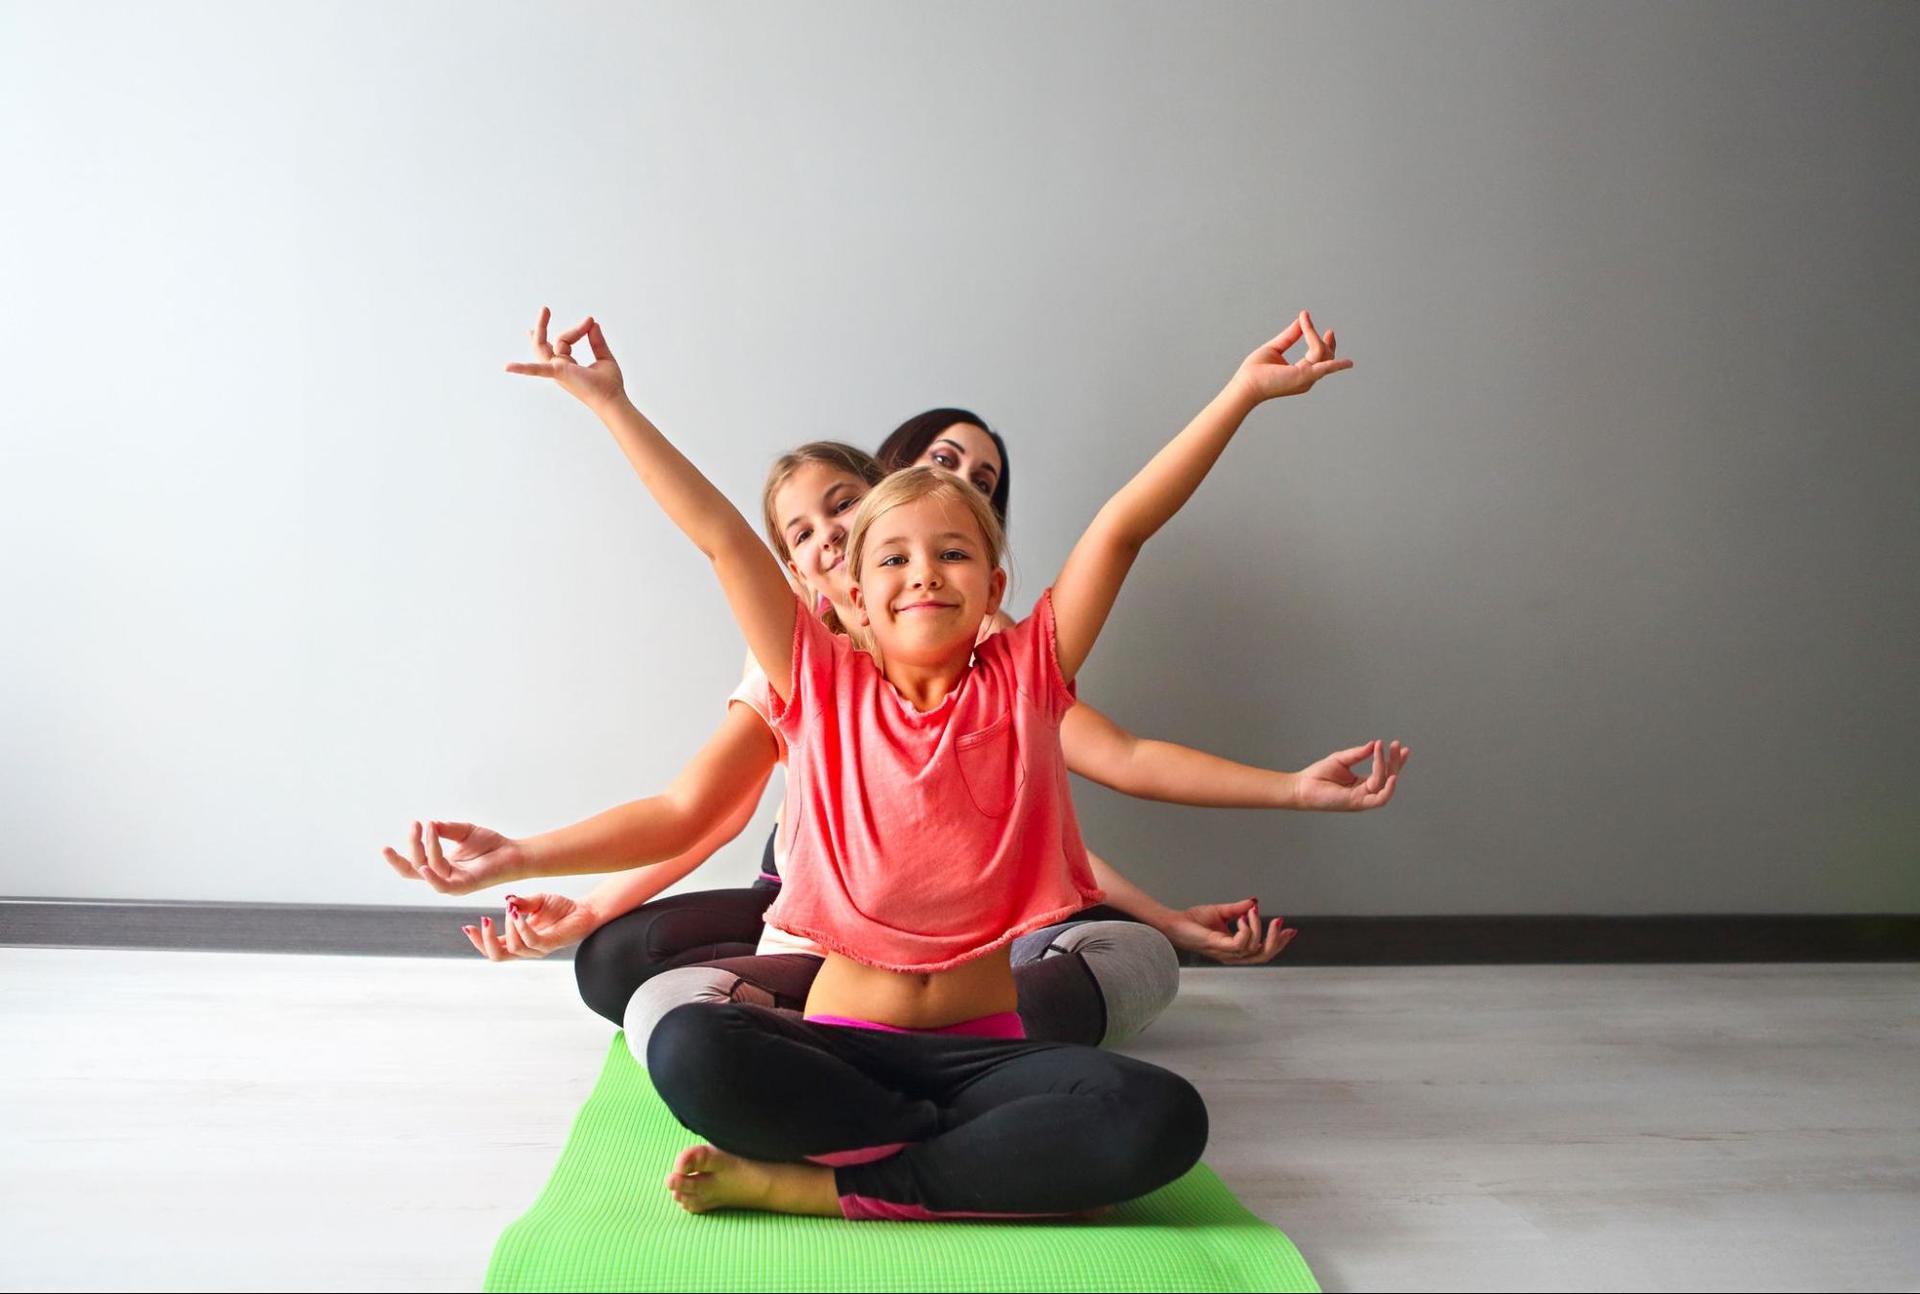 These Yoga Poses and Mindfulness Games Can Help Kids Manage Their Emotions  | Early Childhood | PBS SoCal